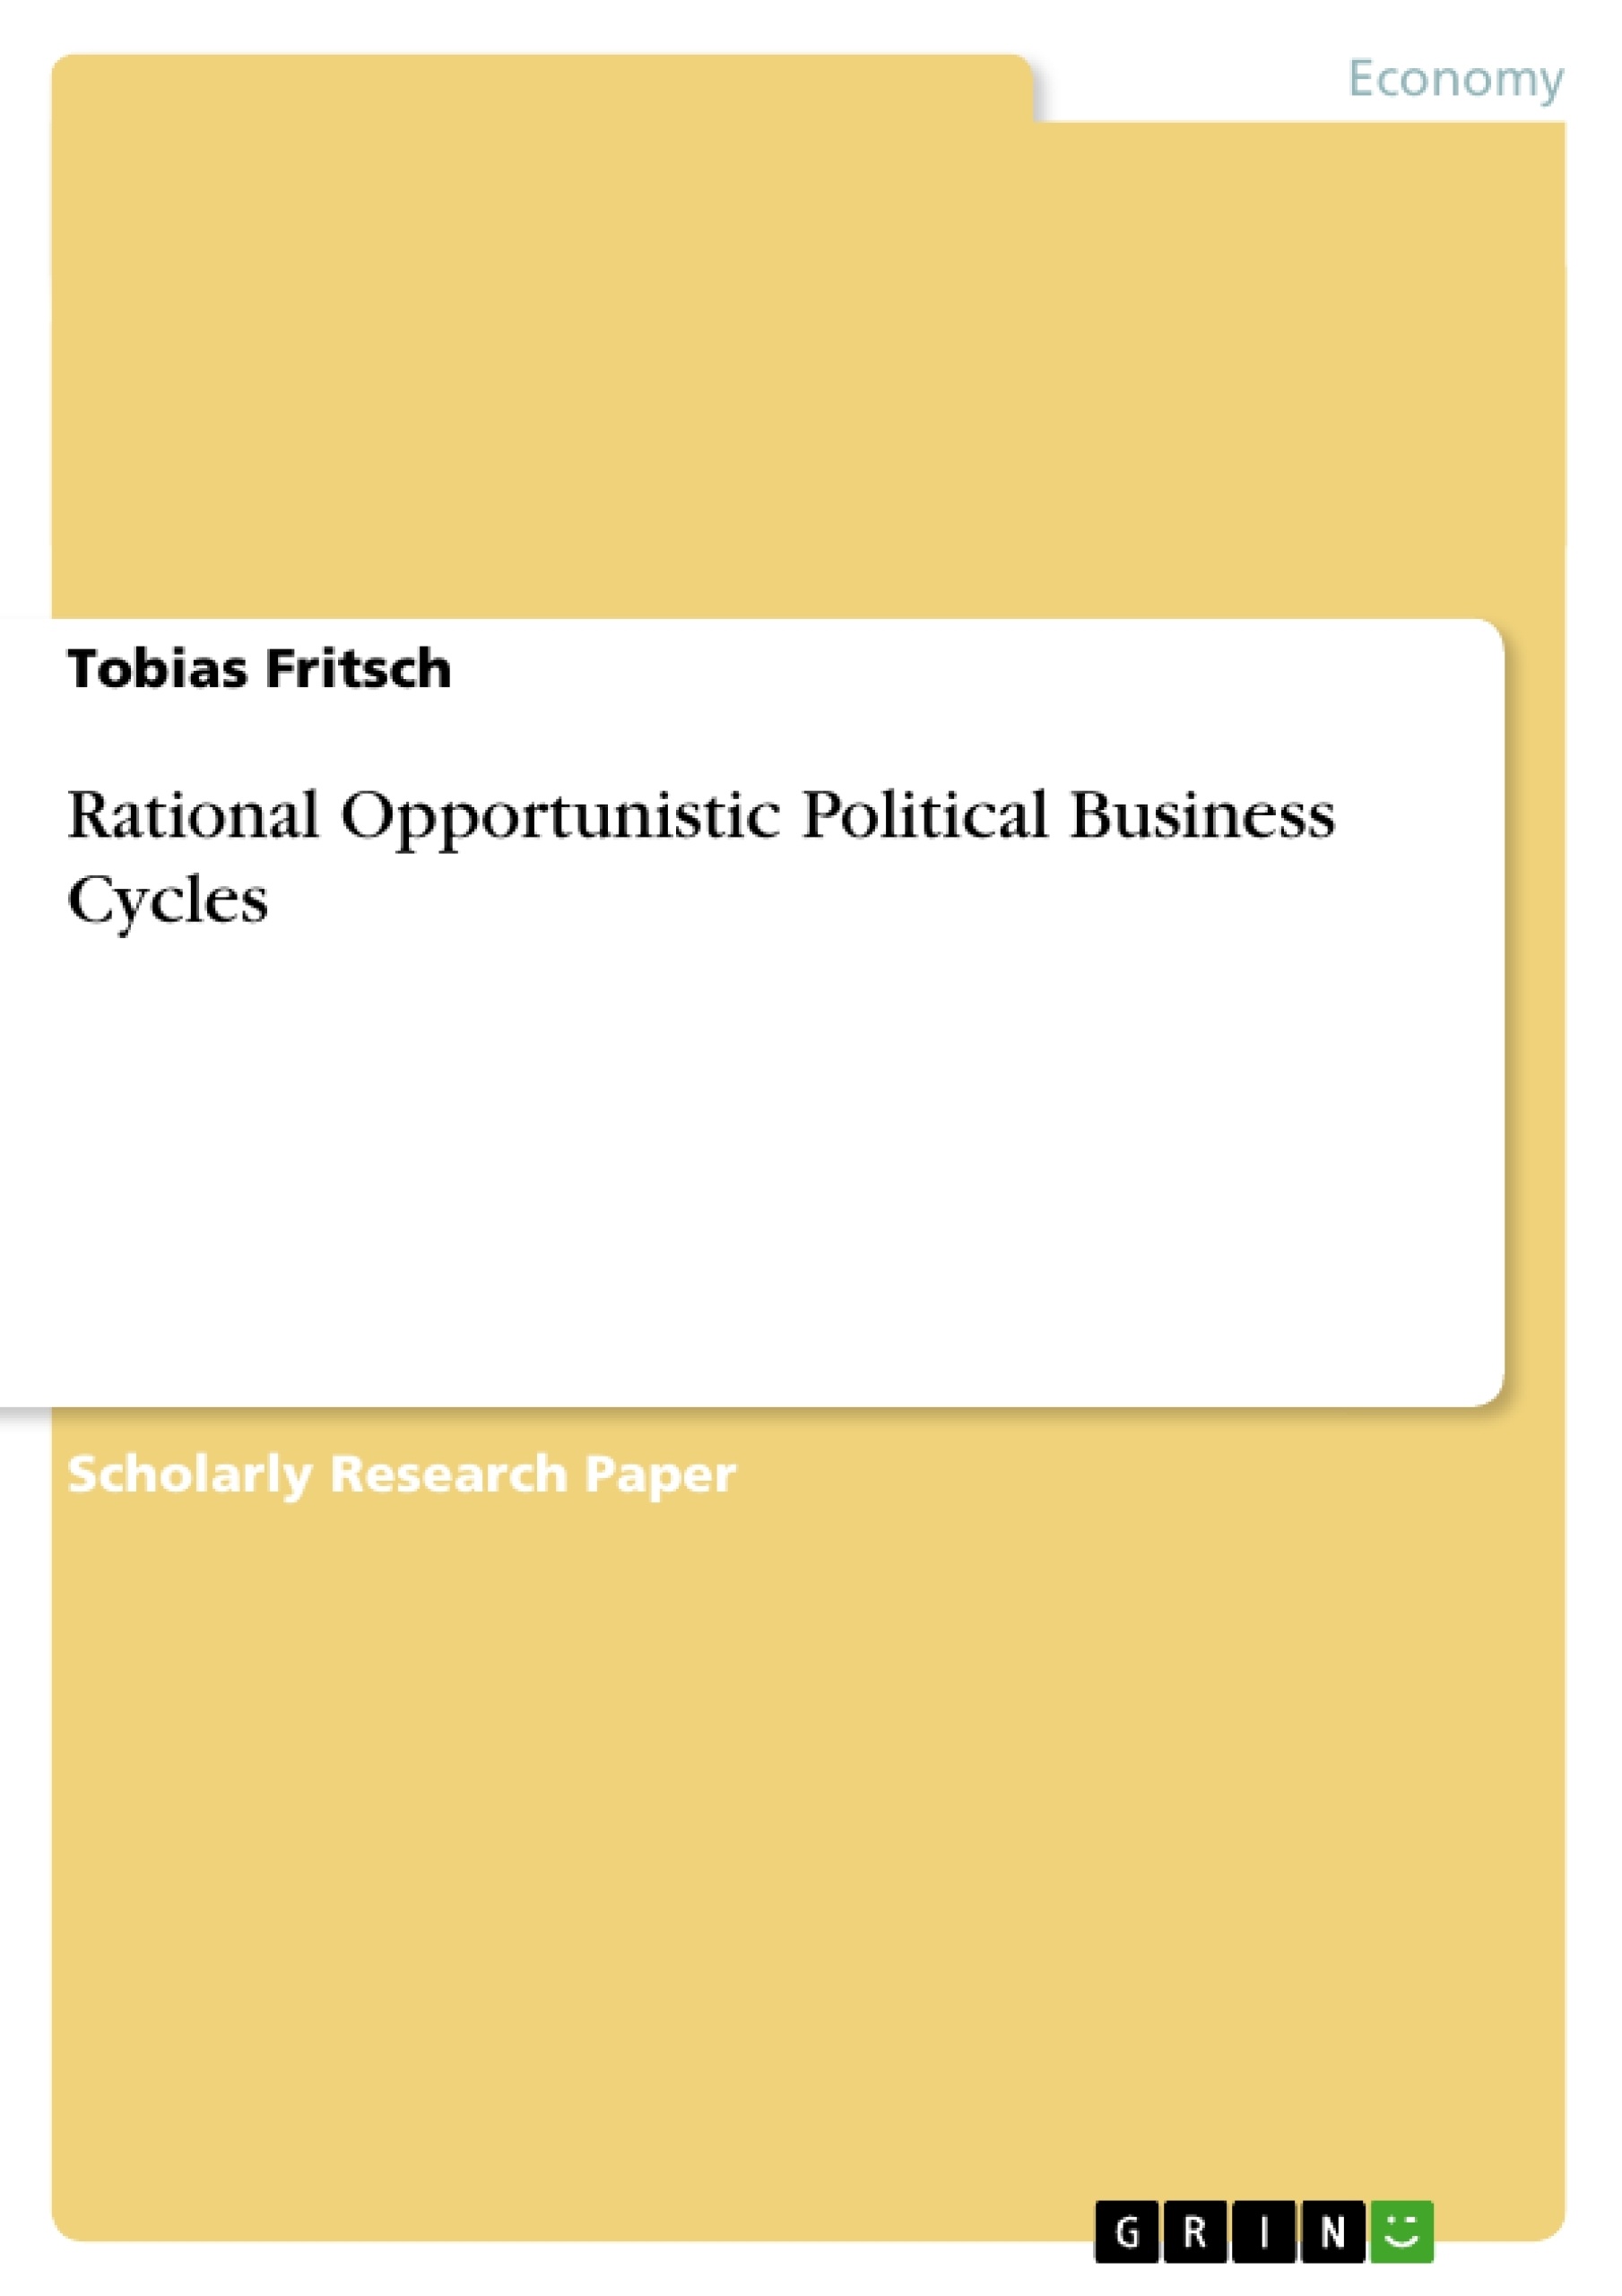 Title: Rational Opportunistic Political Business Cycles